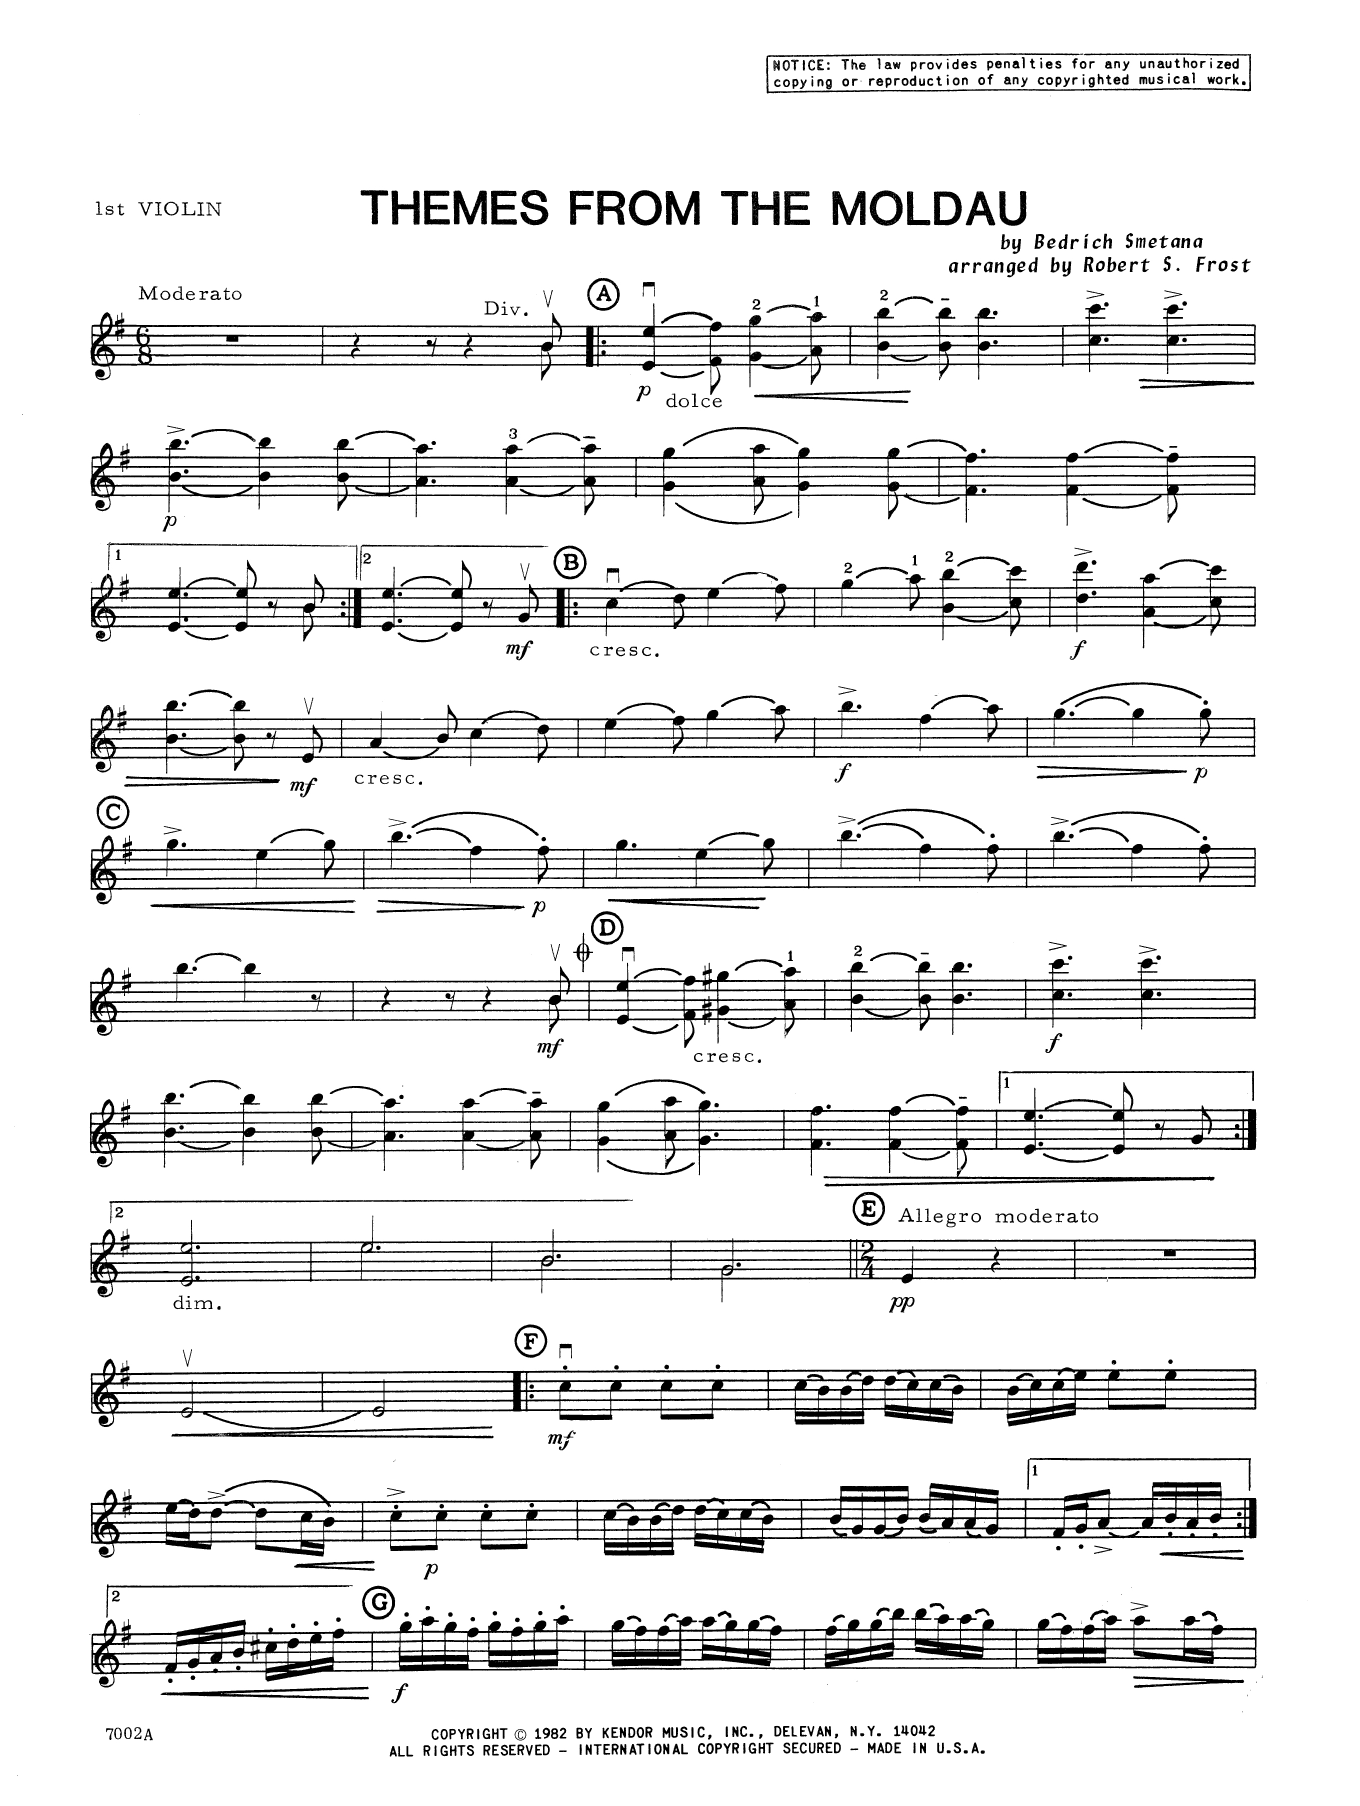 Download Robert S. Frost Themes From The Moldau - 1st Violin Sheet Music